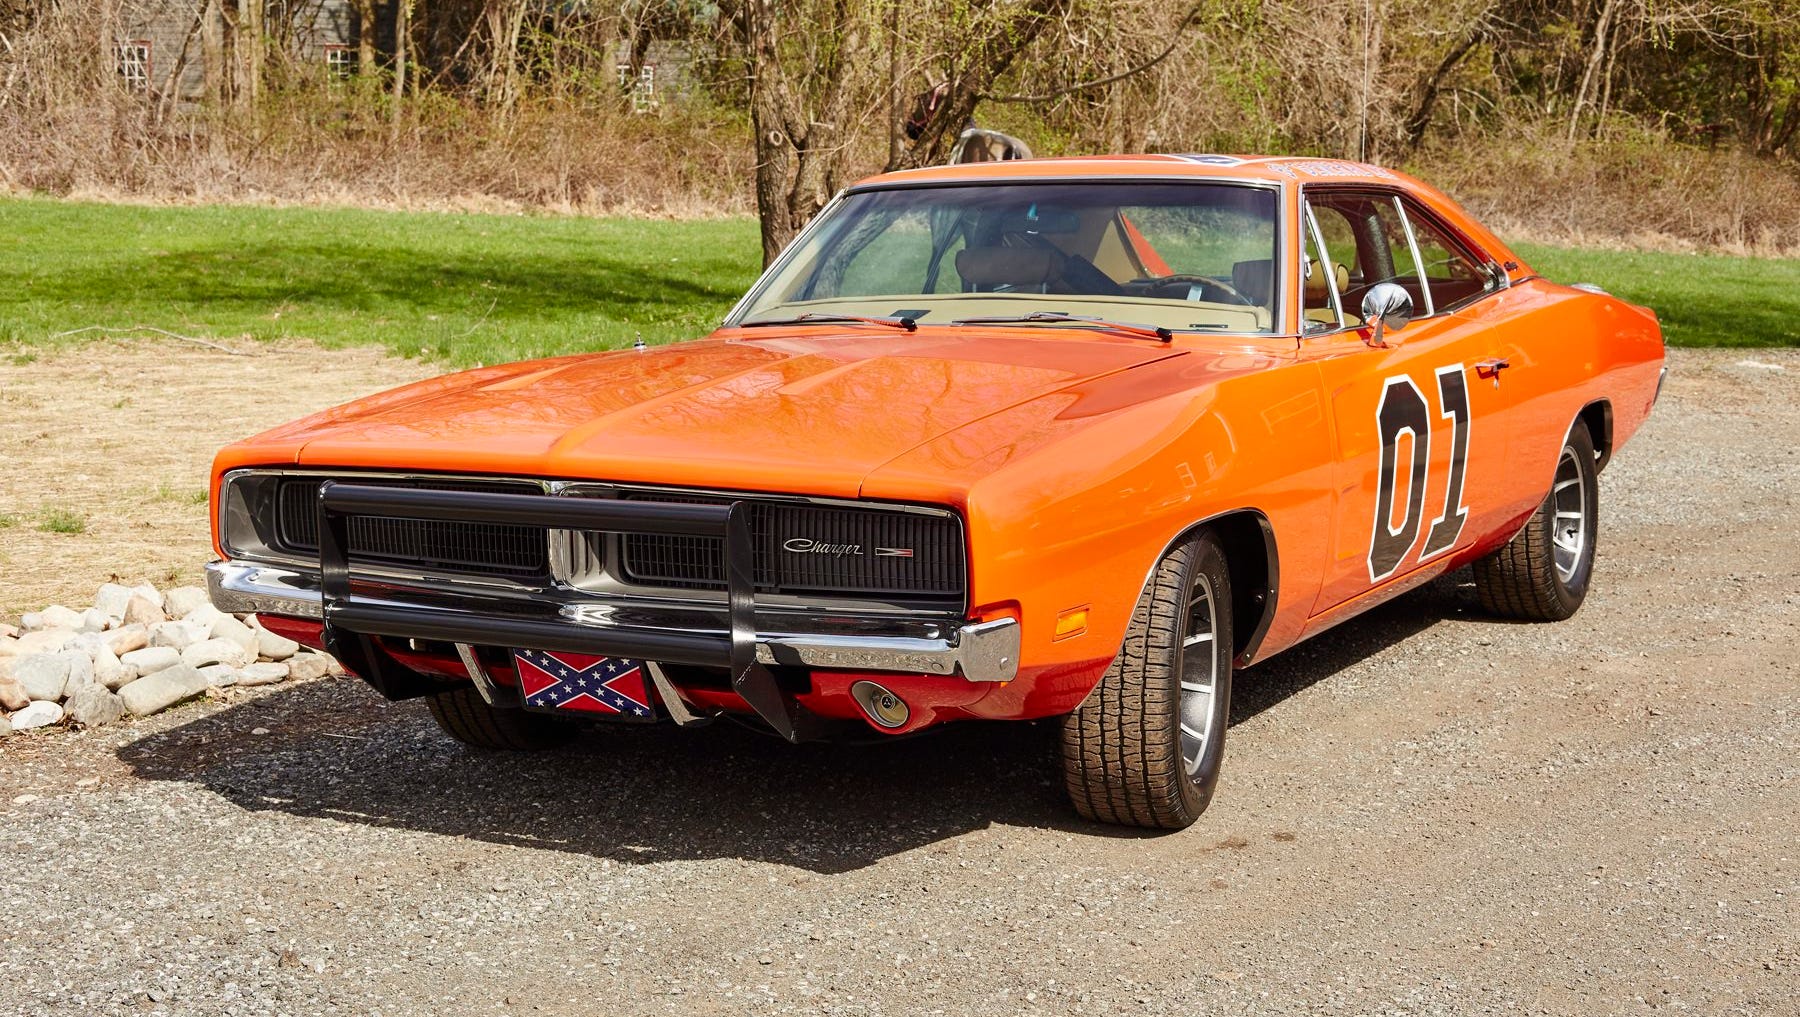 General Lee defeated again; no more 'Hazzard' toys with flag